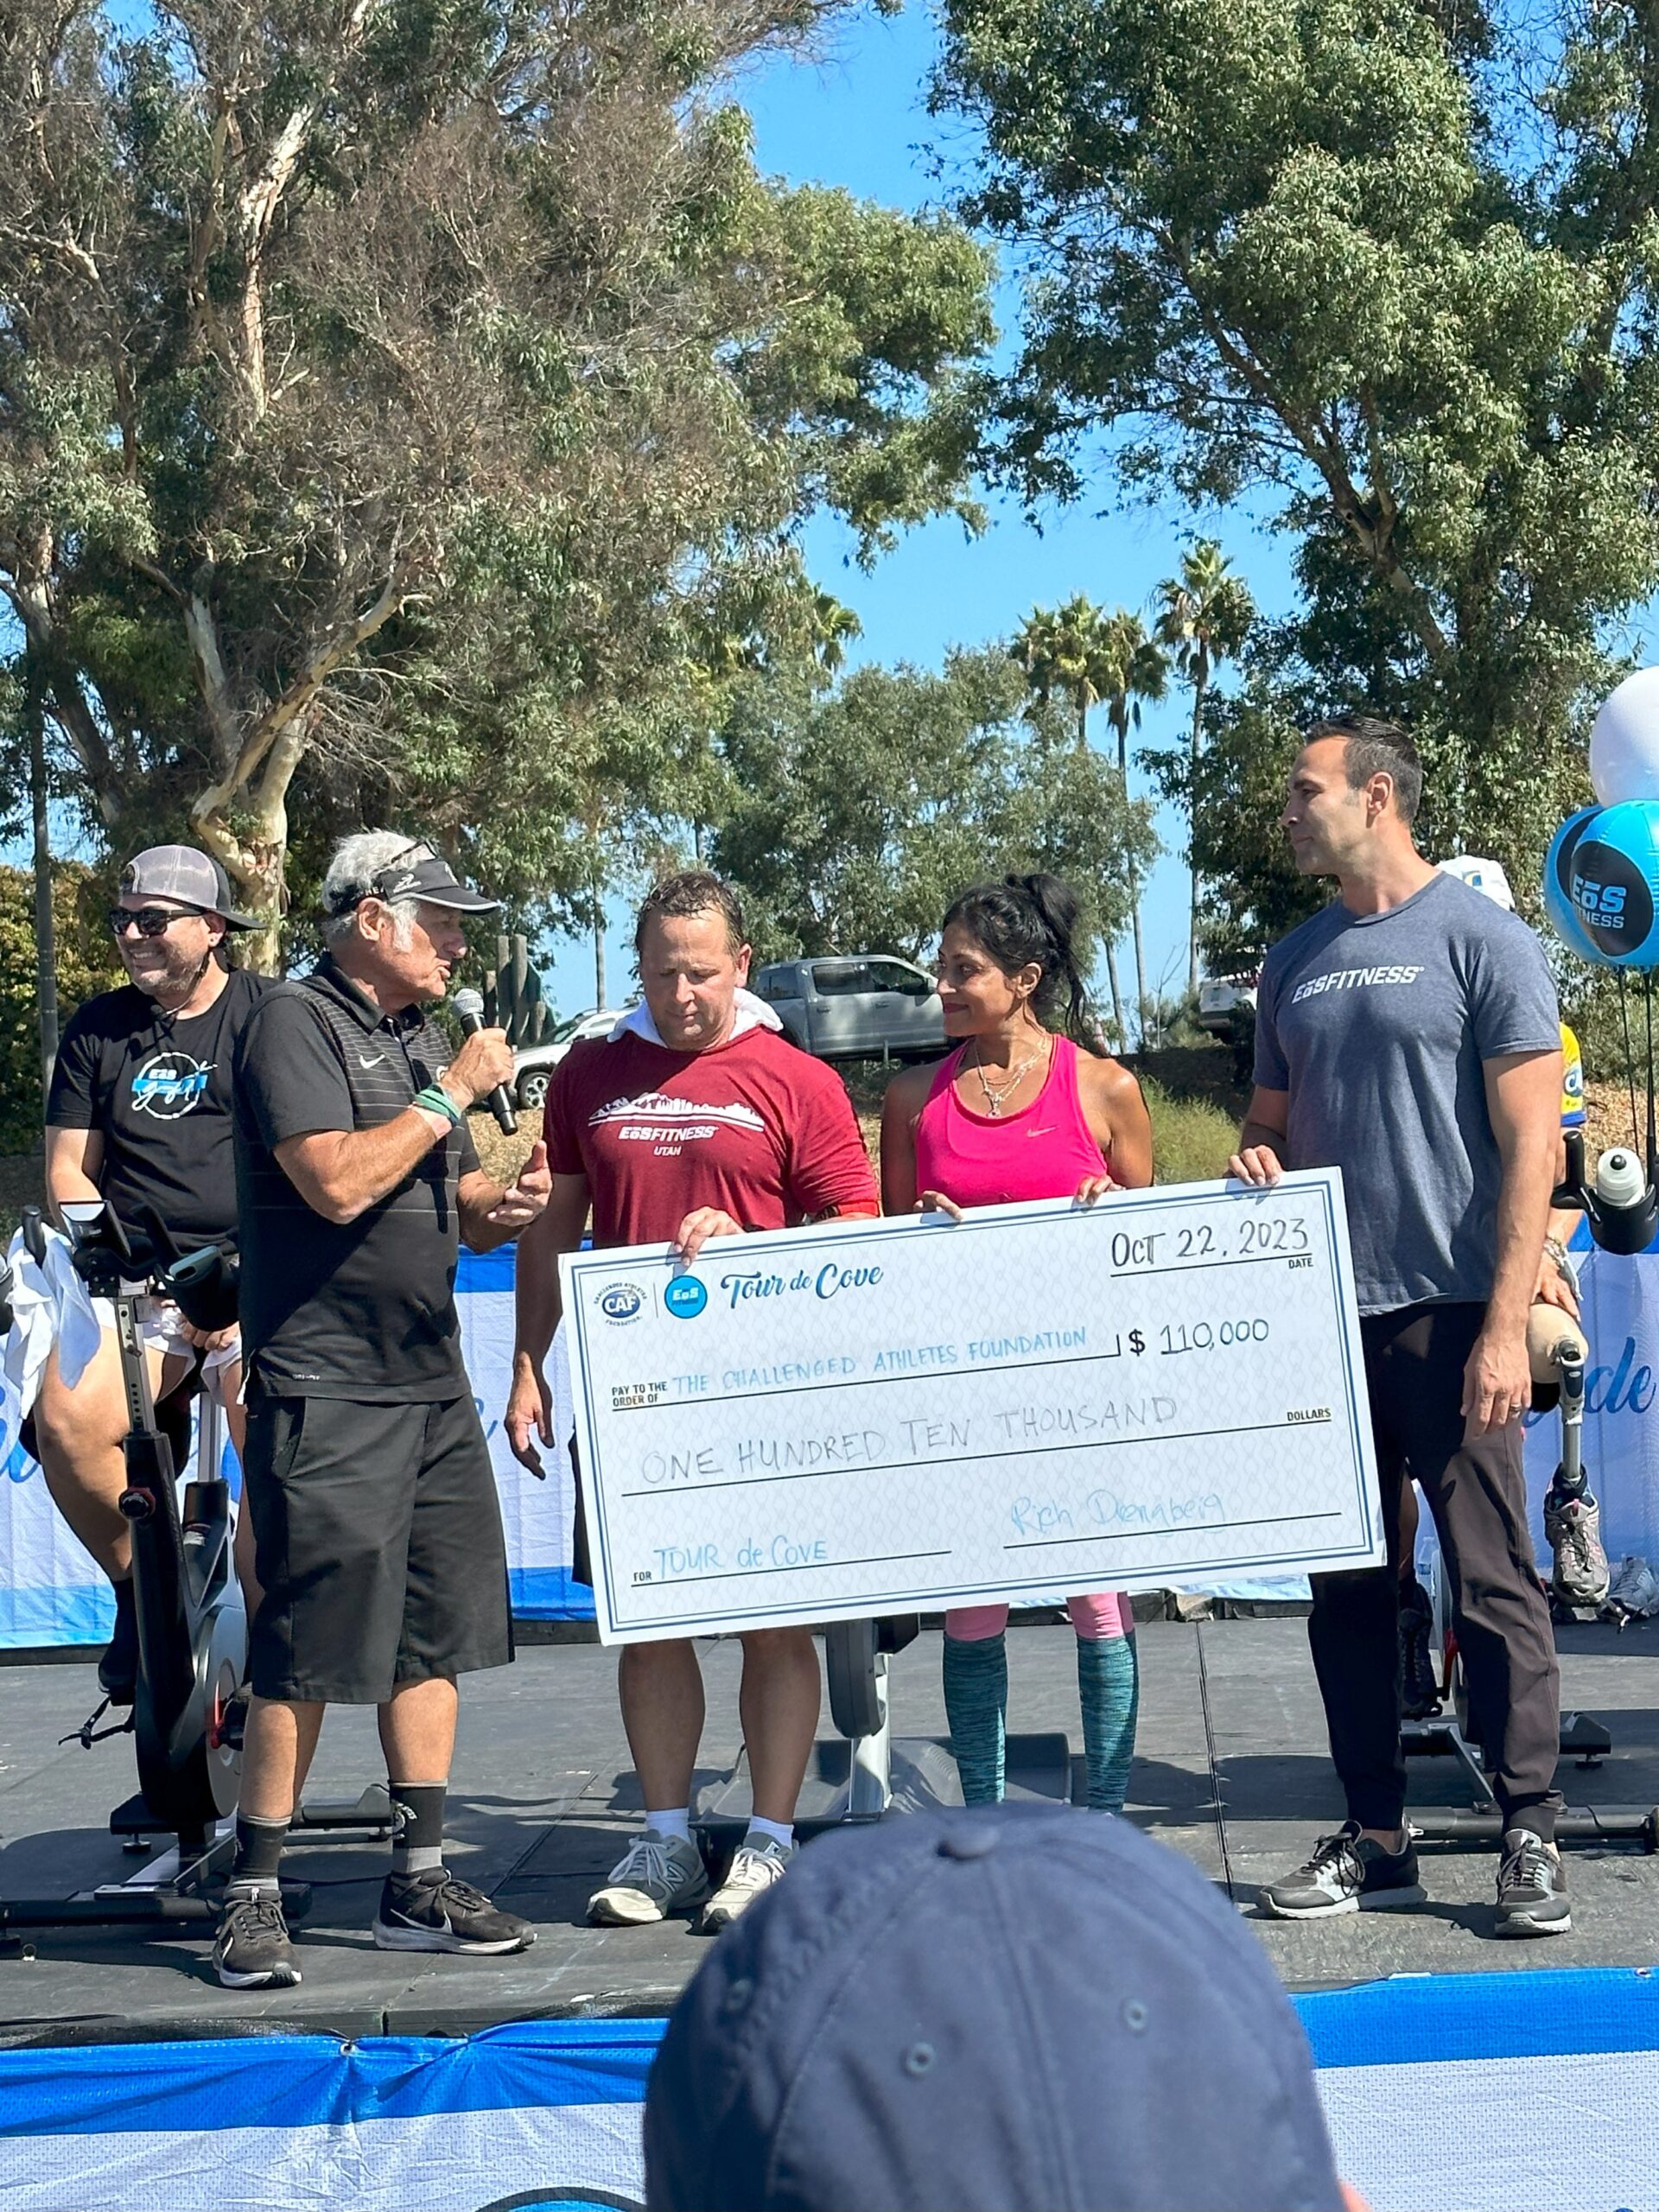 EoS Fitness Raises $110,000 for Challenged Athletes Foundation, Celebrates Inclusive, Active Lifestyles for All